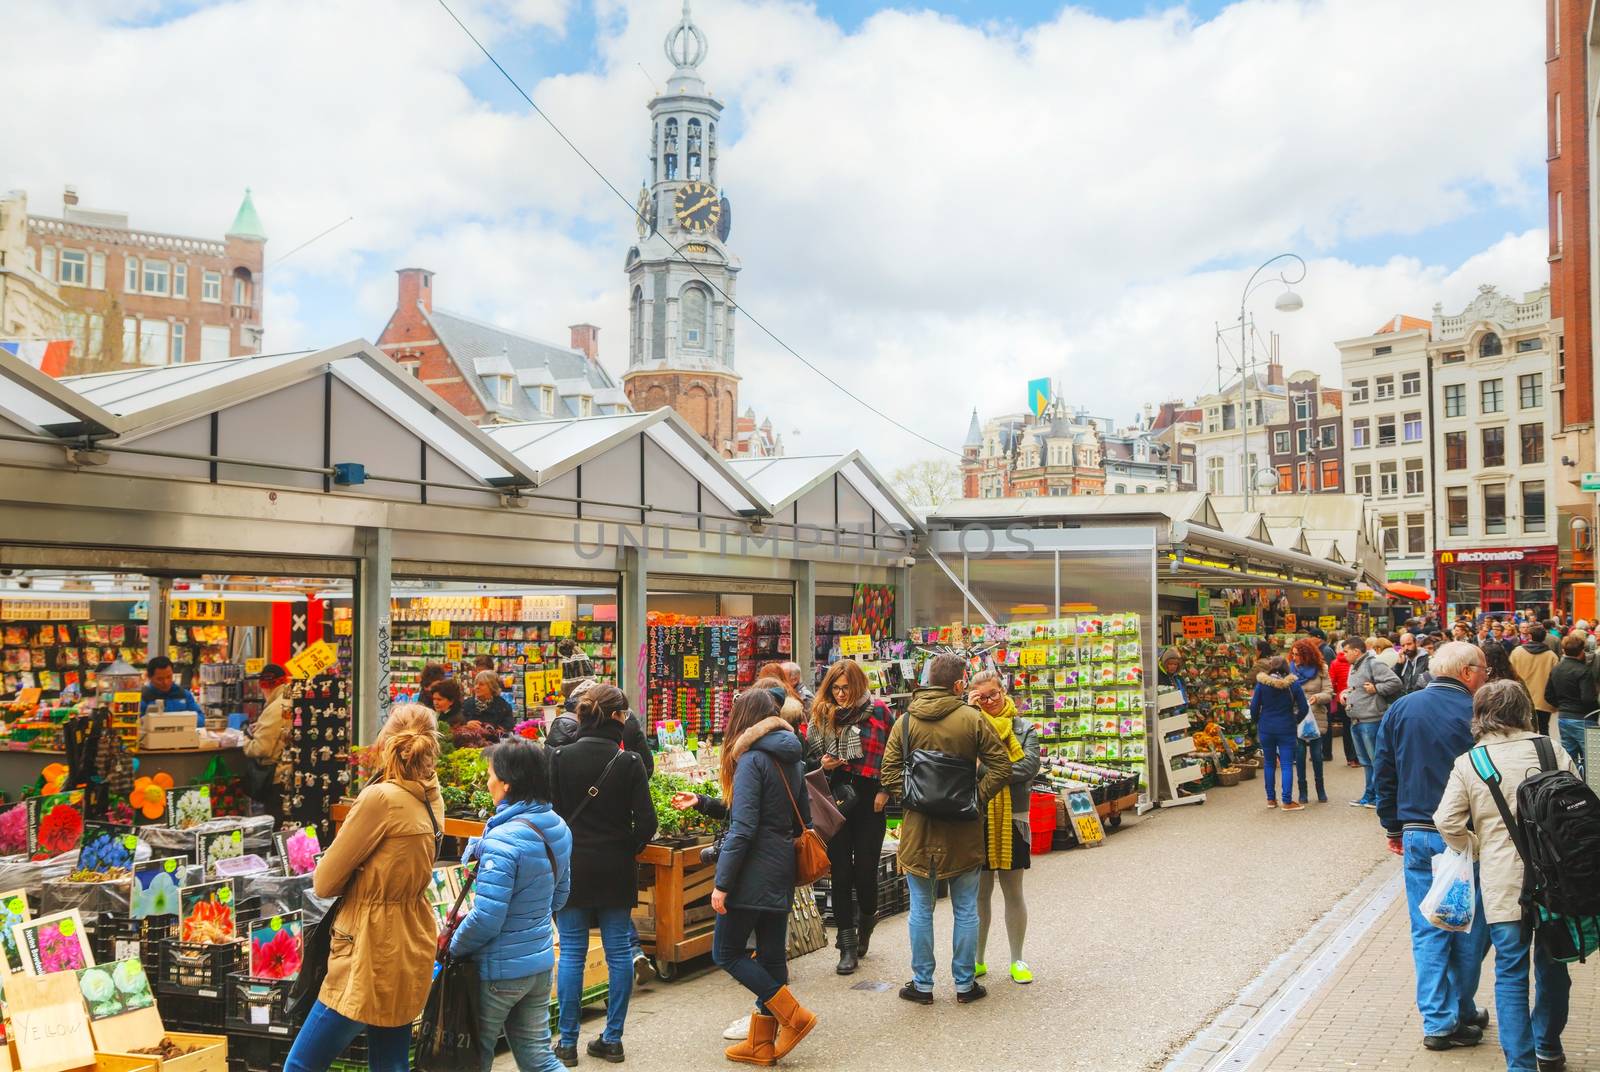 AMSTERDAM - APRIL 17: Floating flower market on April 17, 2015 in Amsterdam, Netherlands. It’s usually billed as the “world’s only floating flower market”.